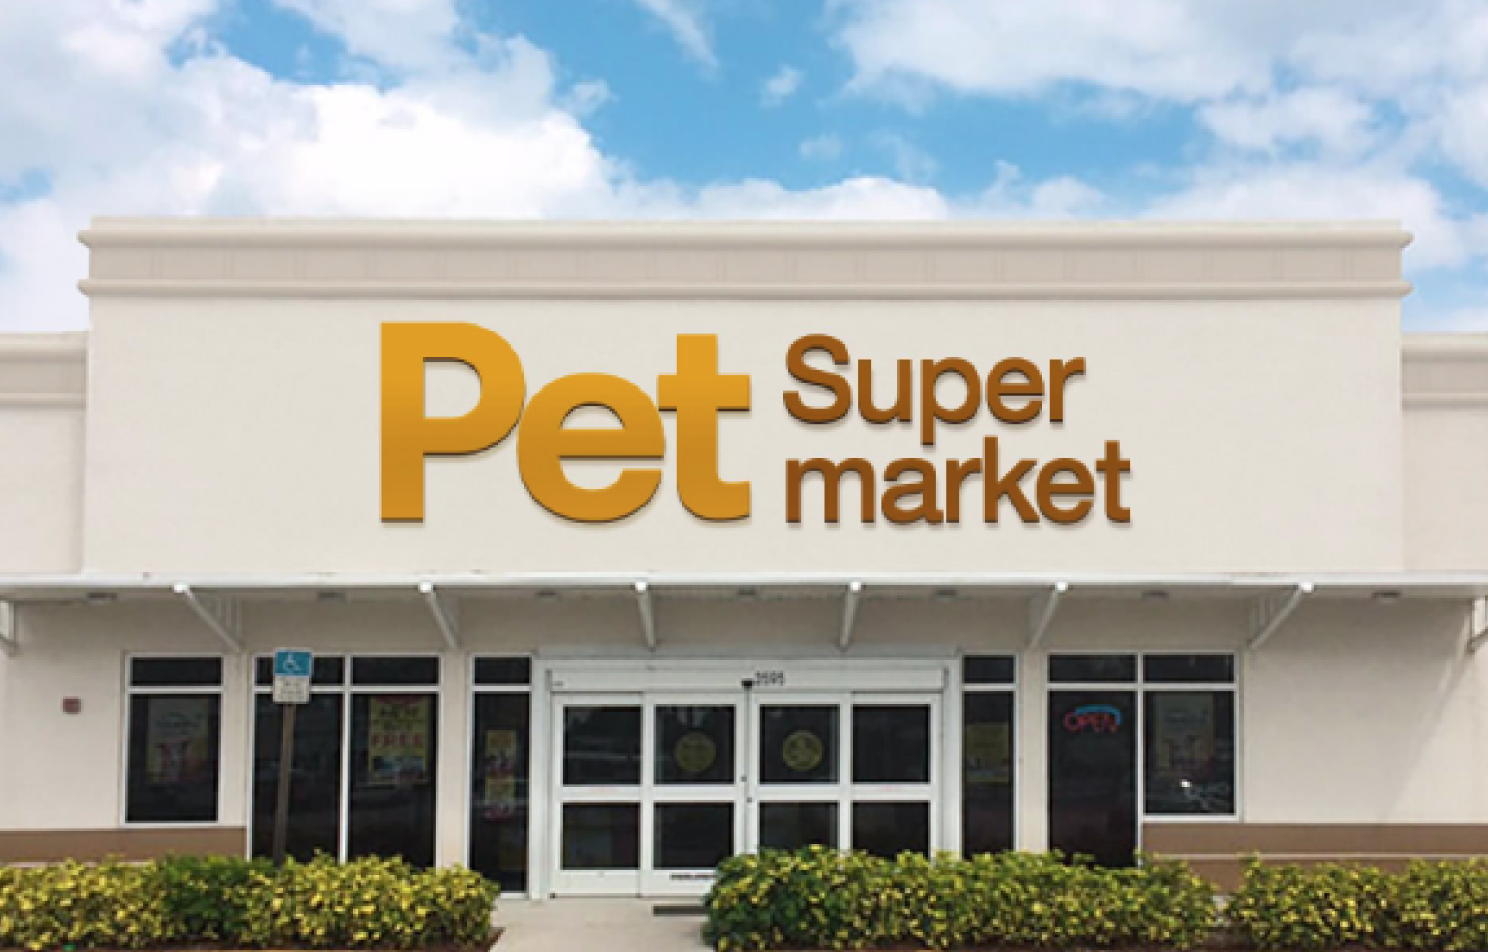 Image provided by Pet Supermarket, Inc.